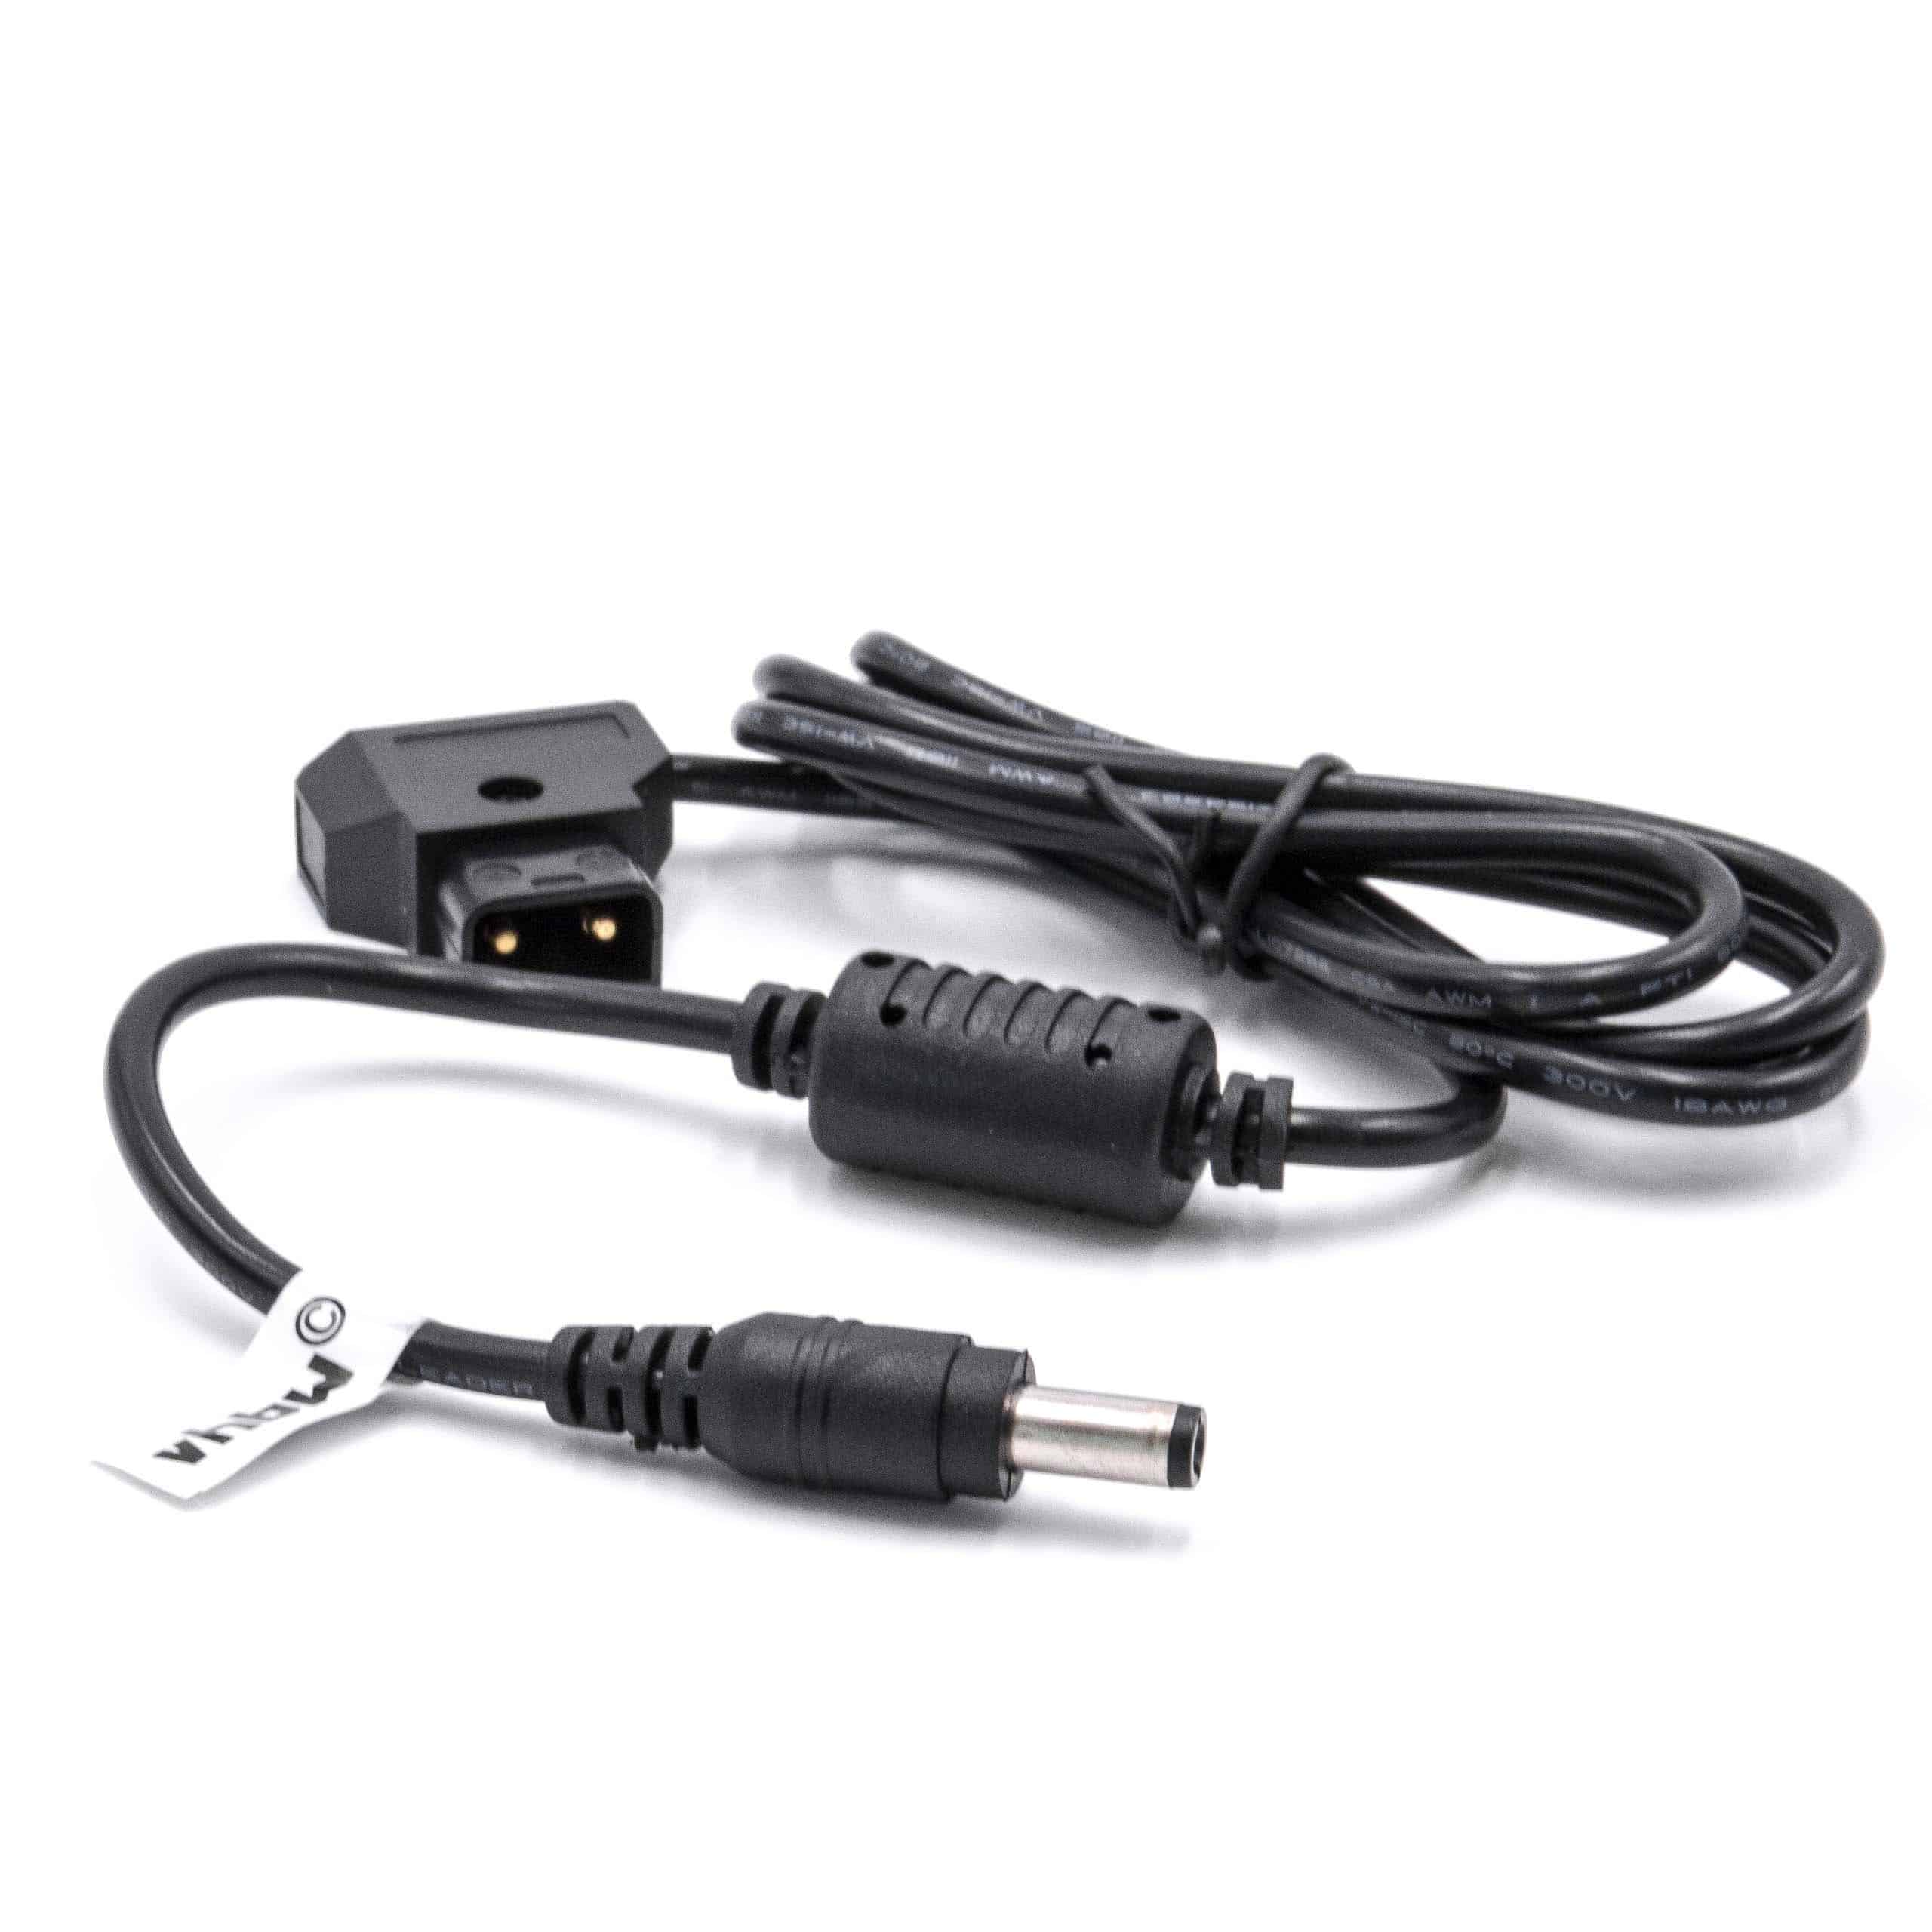 Adapter Cable D-Tap (male) to LED Power Supply suitable for Anton Bauer Dionic, D-Tap Camera - 1 m Black